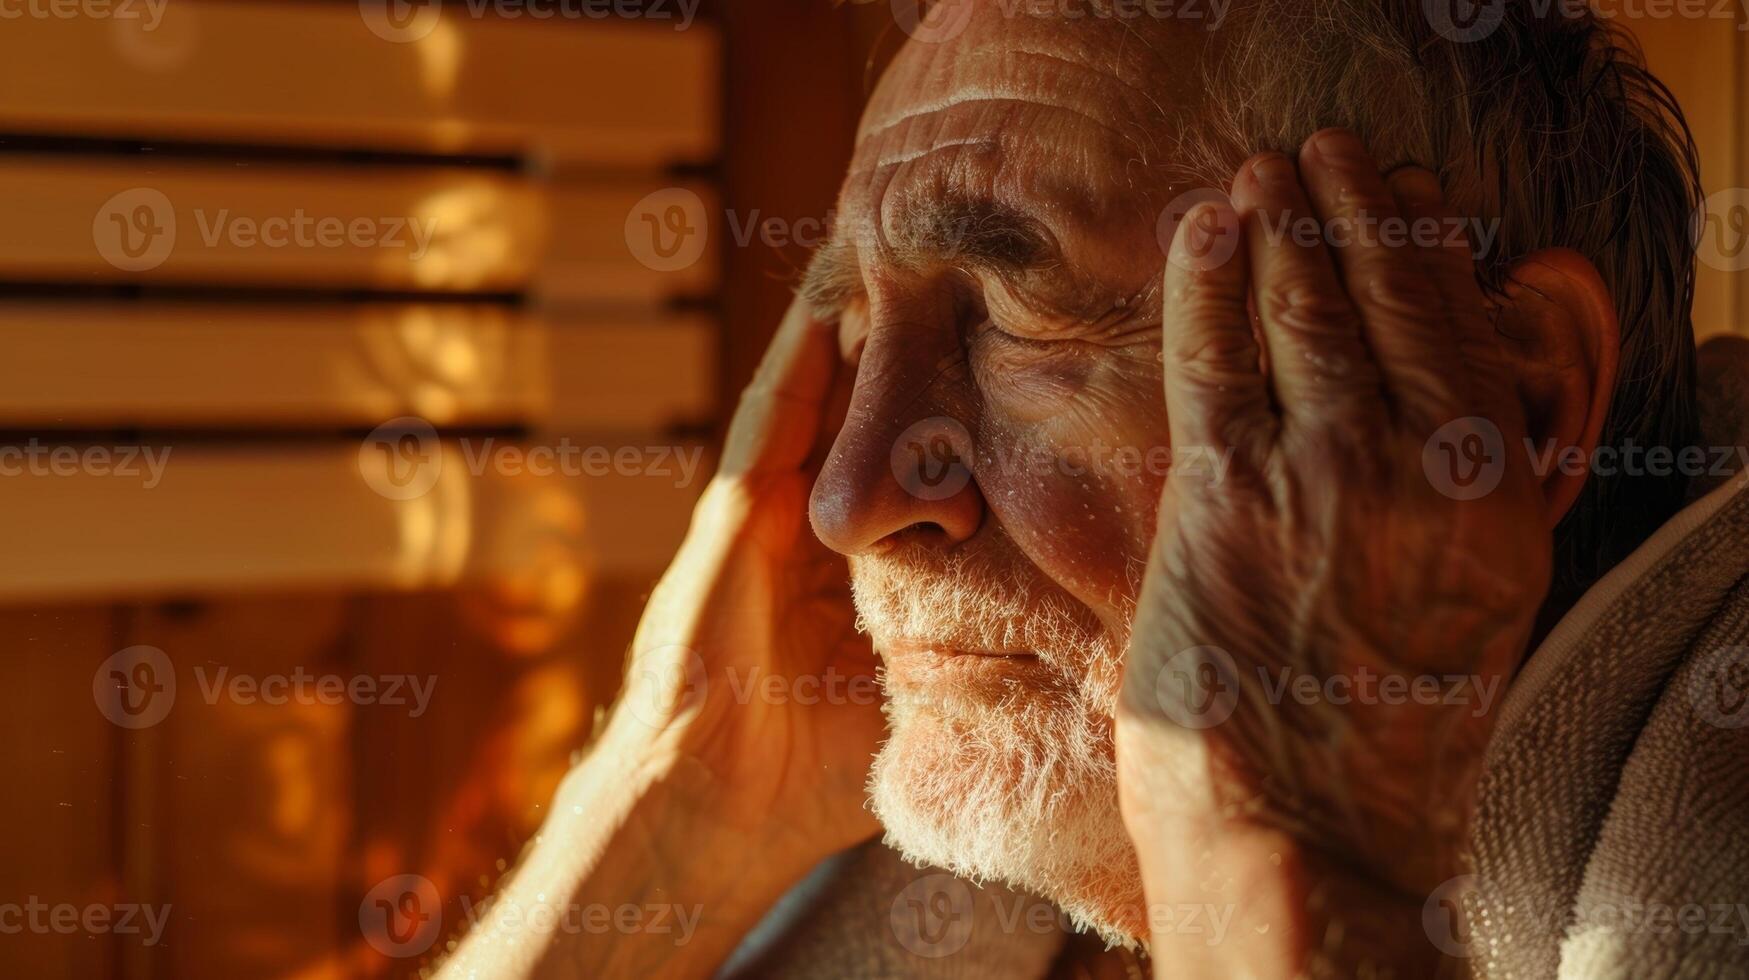 An older person using a towel to wipe away the sweat from their face while inside the sauna enjoying the detoxifying benefits of infrared heat. photo